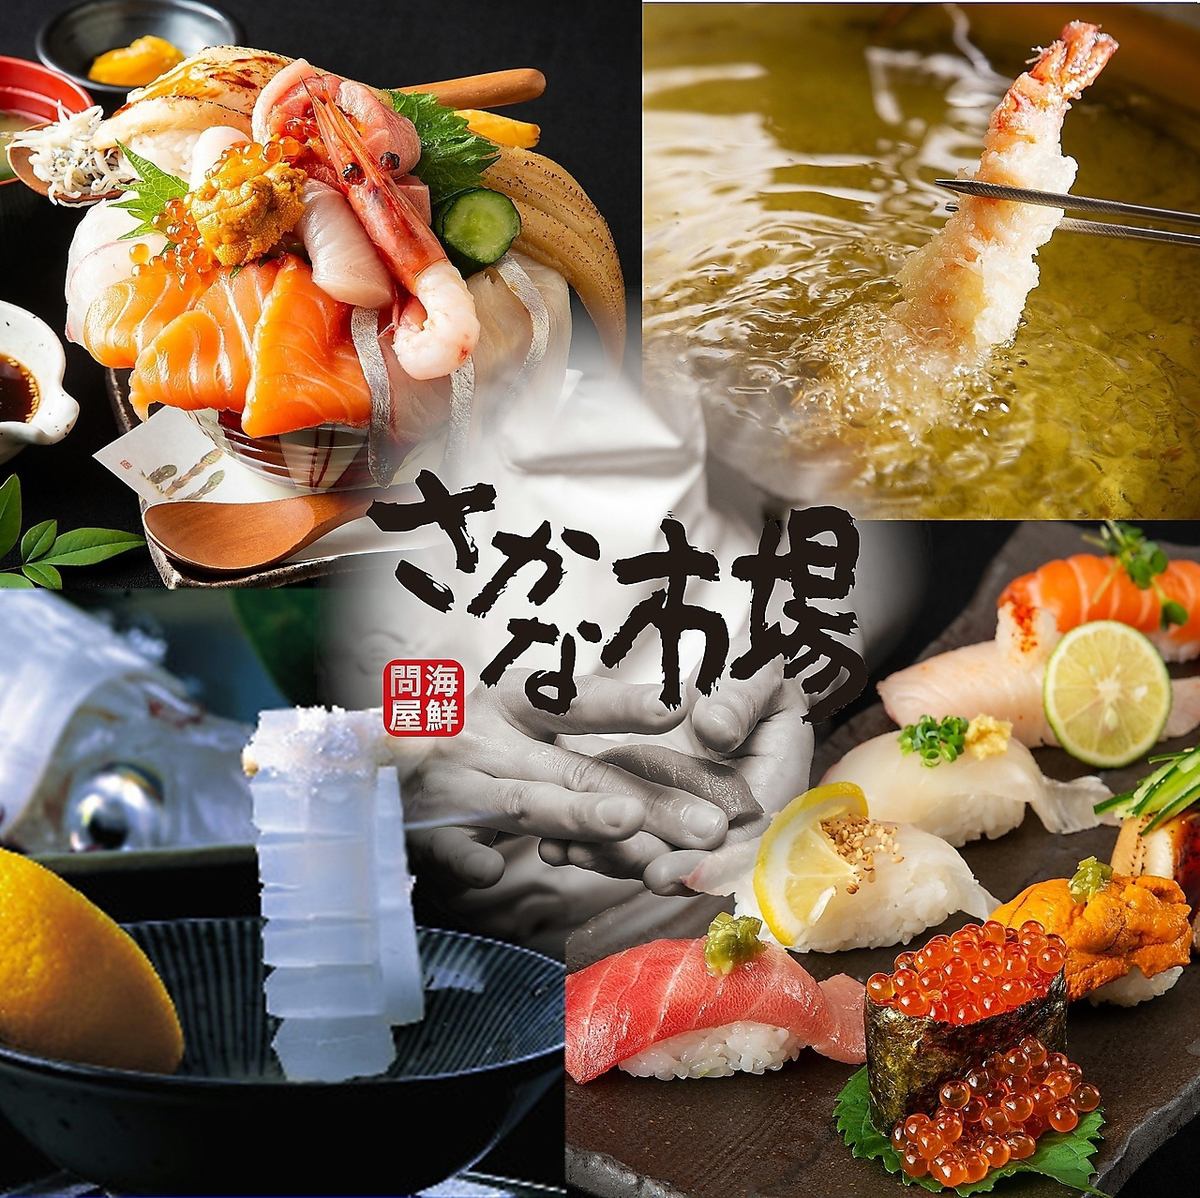 We have a wide variety of Hiroshima local sake and local famous sake that go well with fresh fish!